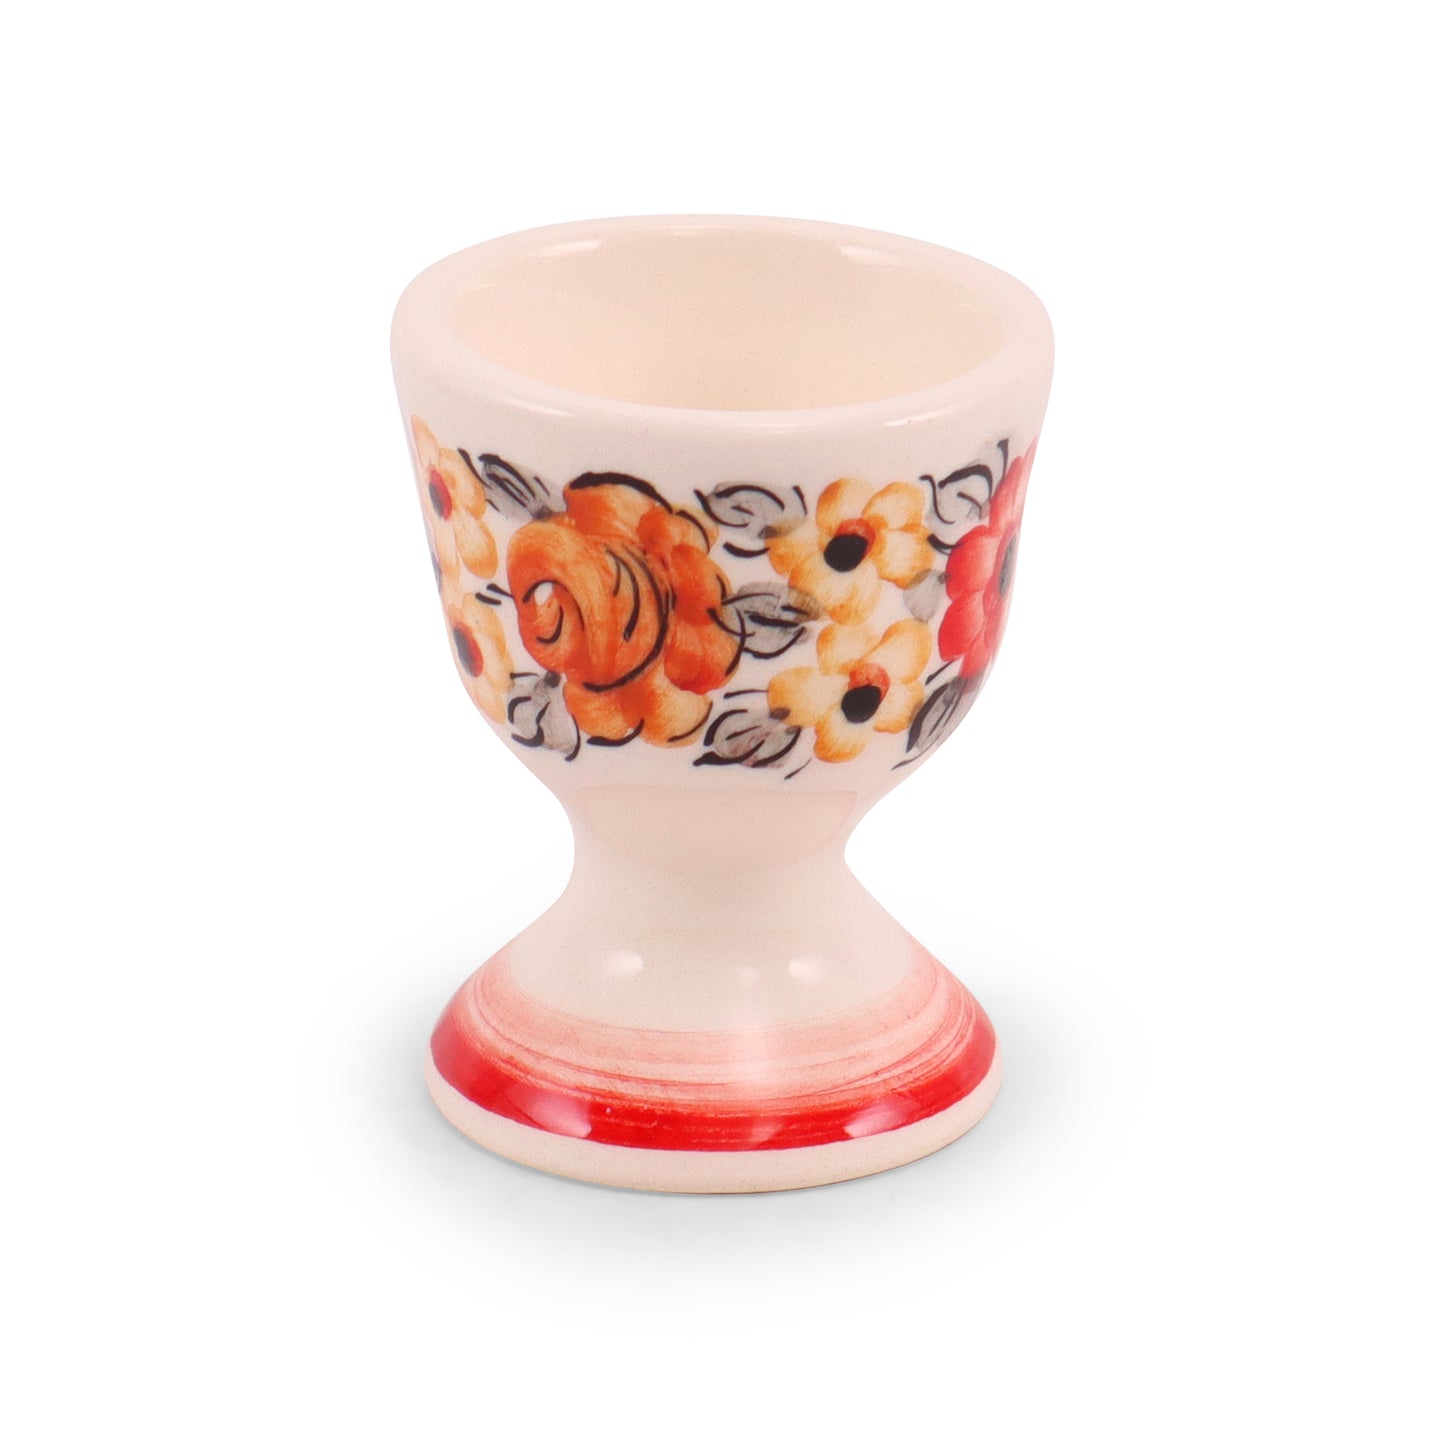 2"x2.5" Egg Cup. Pattern: Red